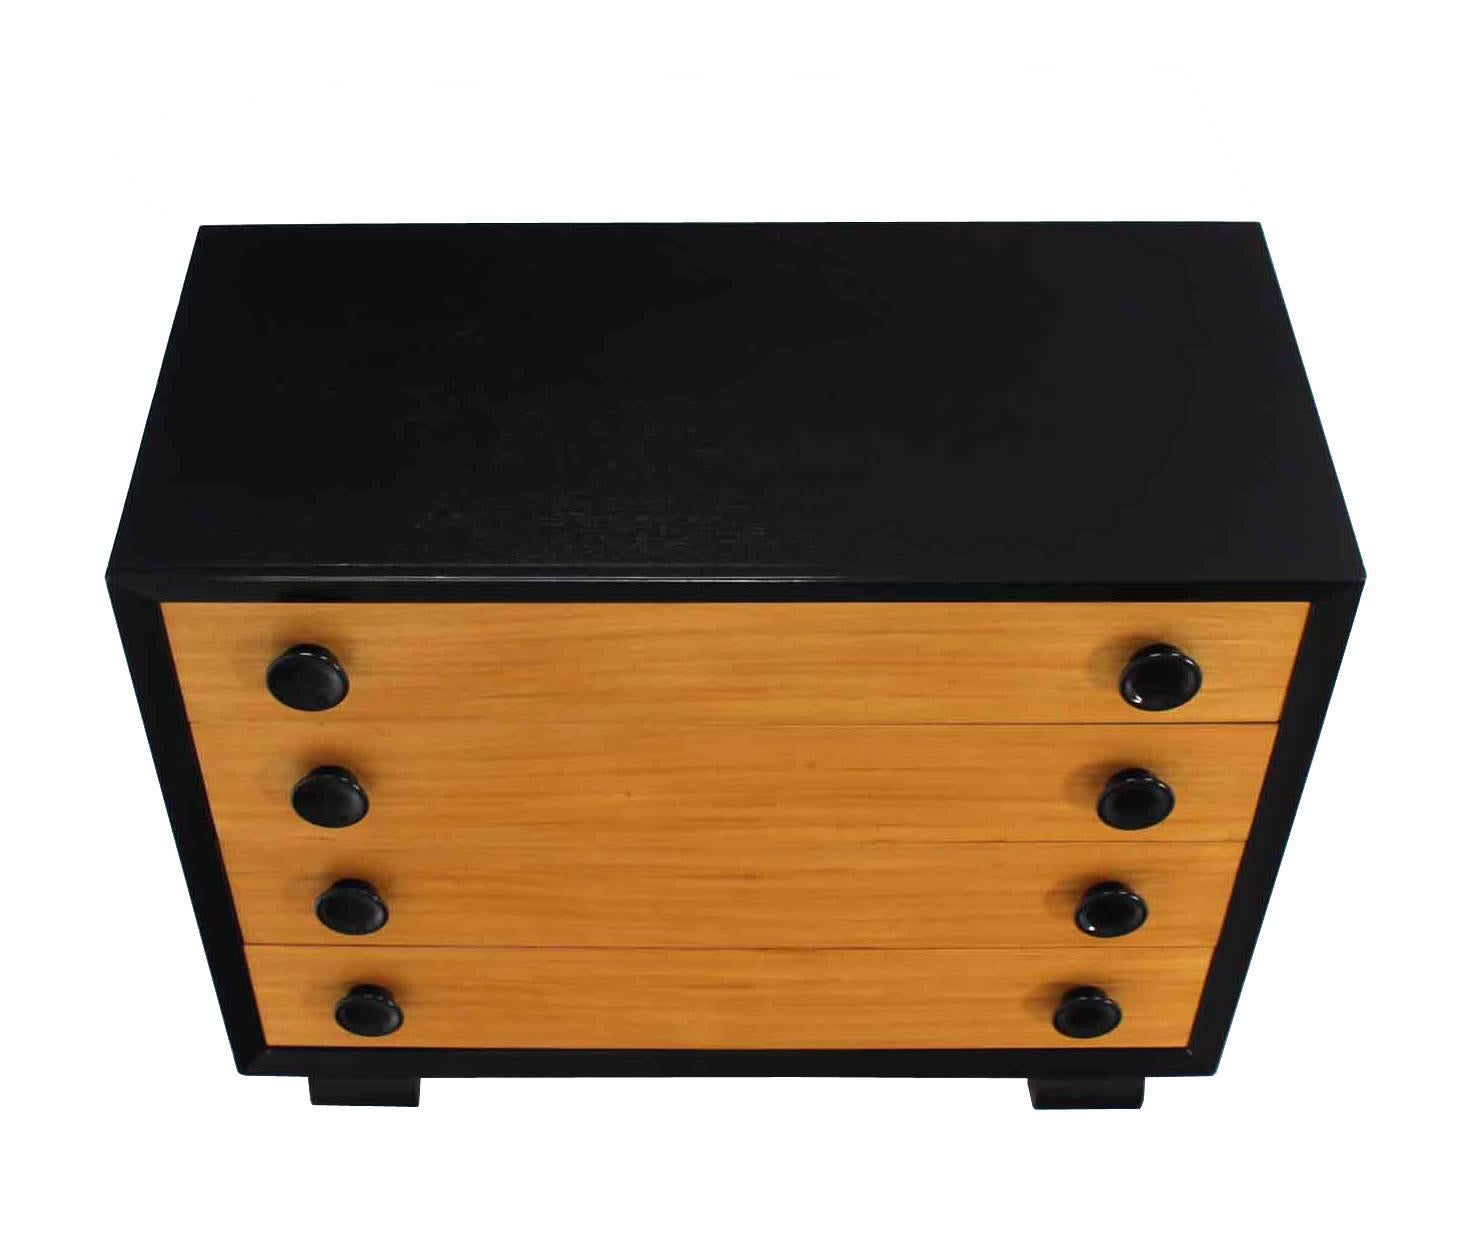 Very nice Mid-Century Modern Art Deco style two-tone black and gold lacquer dresser.